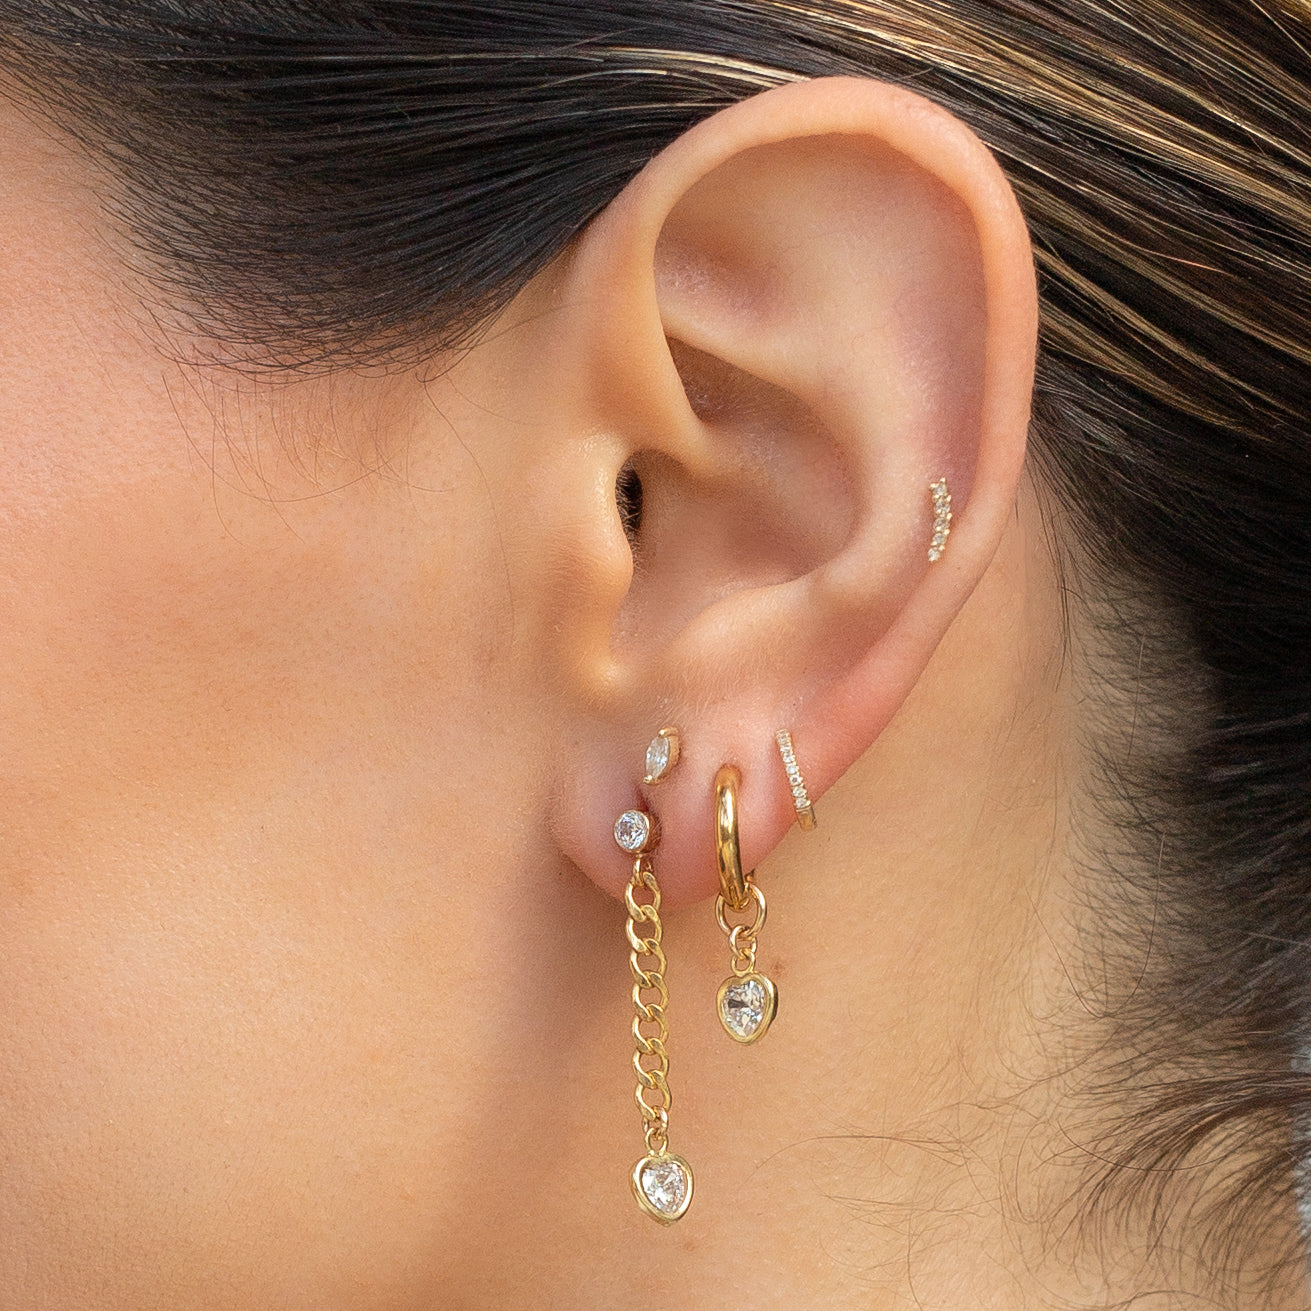 Ear with multiple earrings showing Round Cubic Zirconia Stud Earring with Hanging Curb Chain and CZ Heart Drop Charm Earring and Gold Hoop Huggies with CZ Heart drop charm